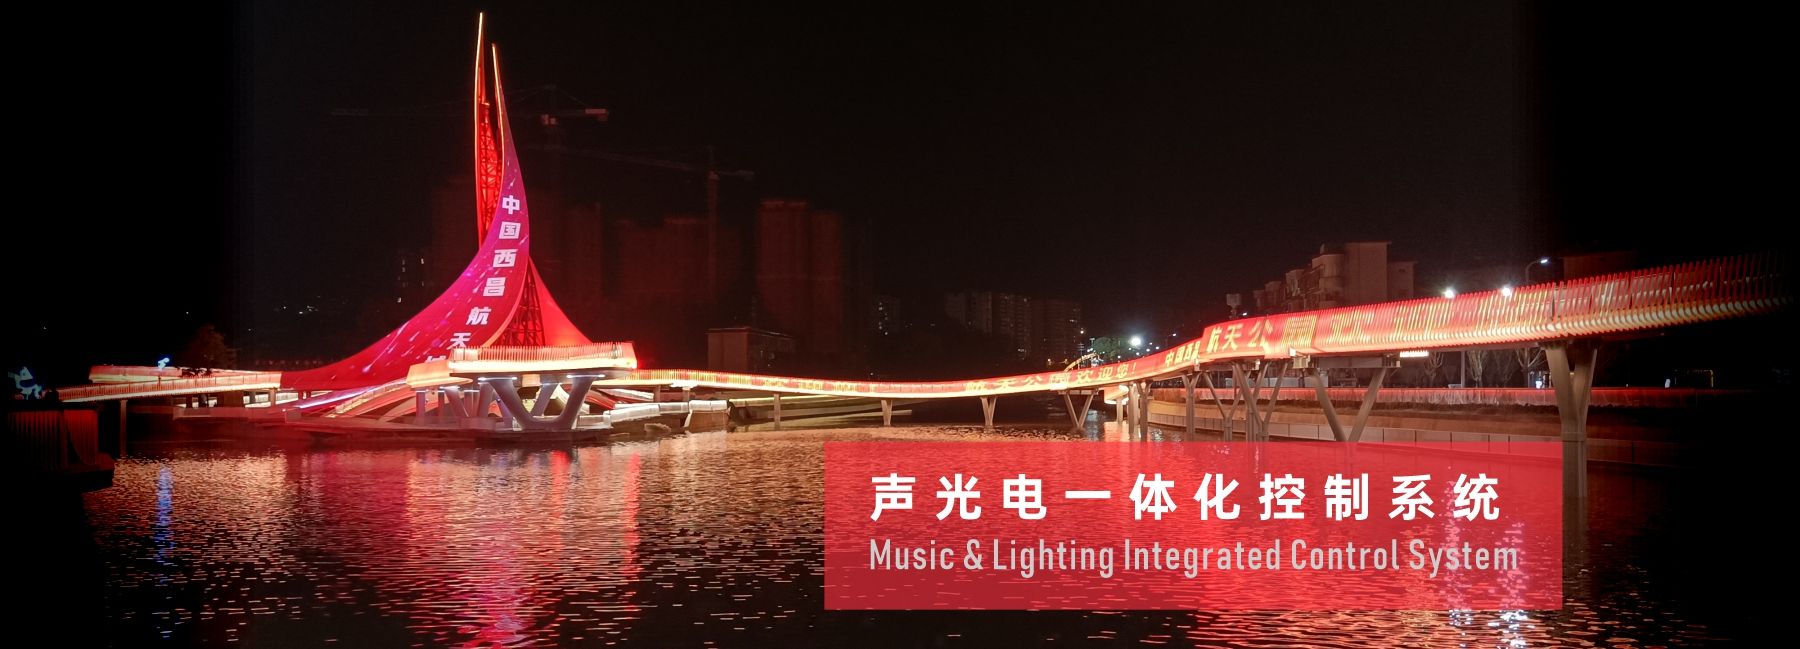 Music & Lighting Integrated Control System